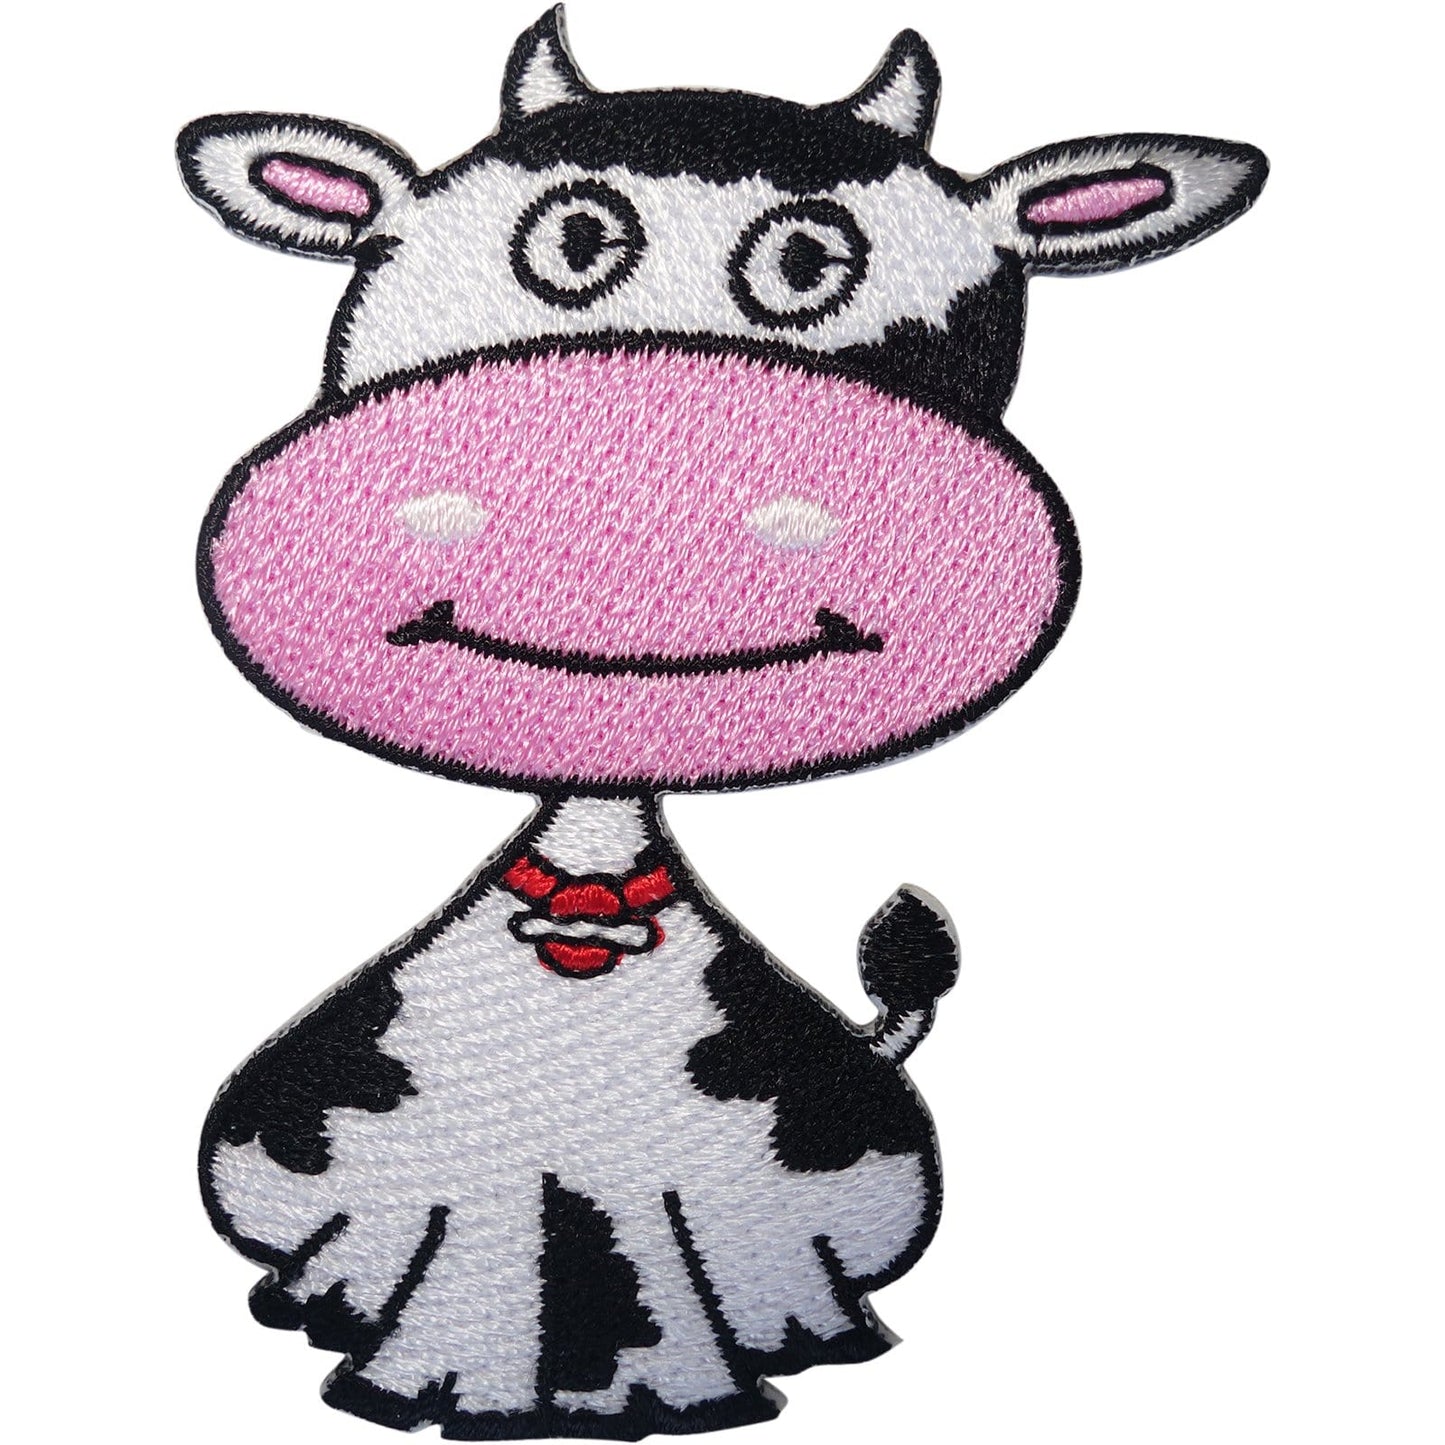 Cow Patch Iron Sew On Embroidered Badge Farm Animal Crafts Embroidery Applique